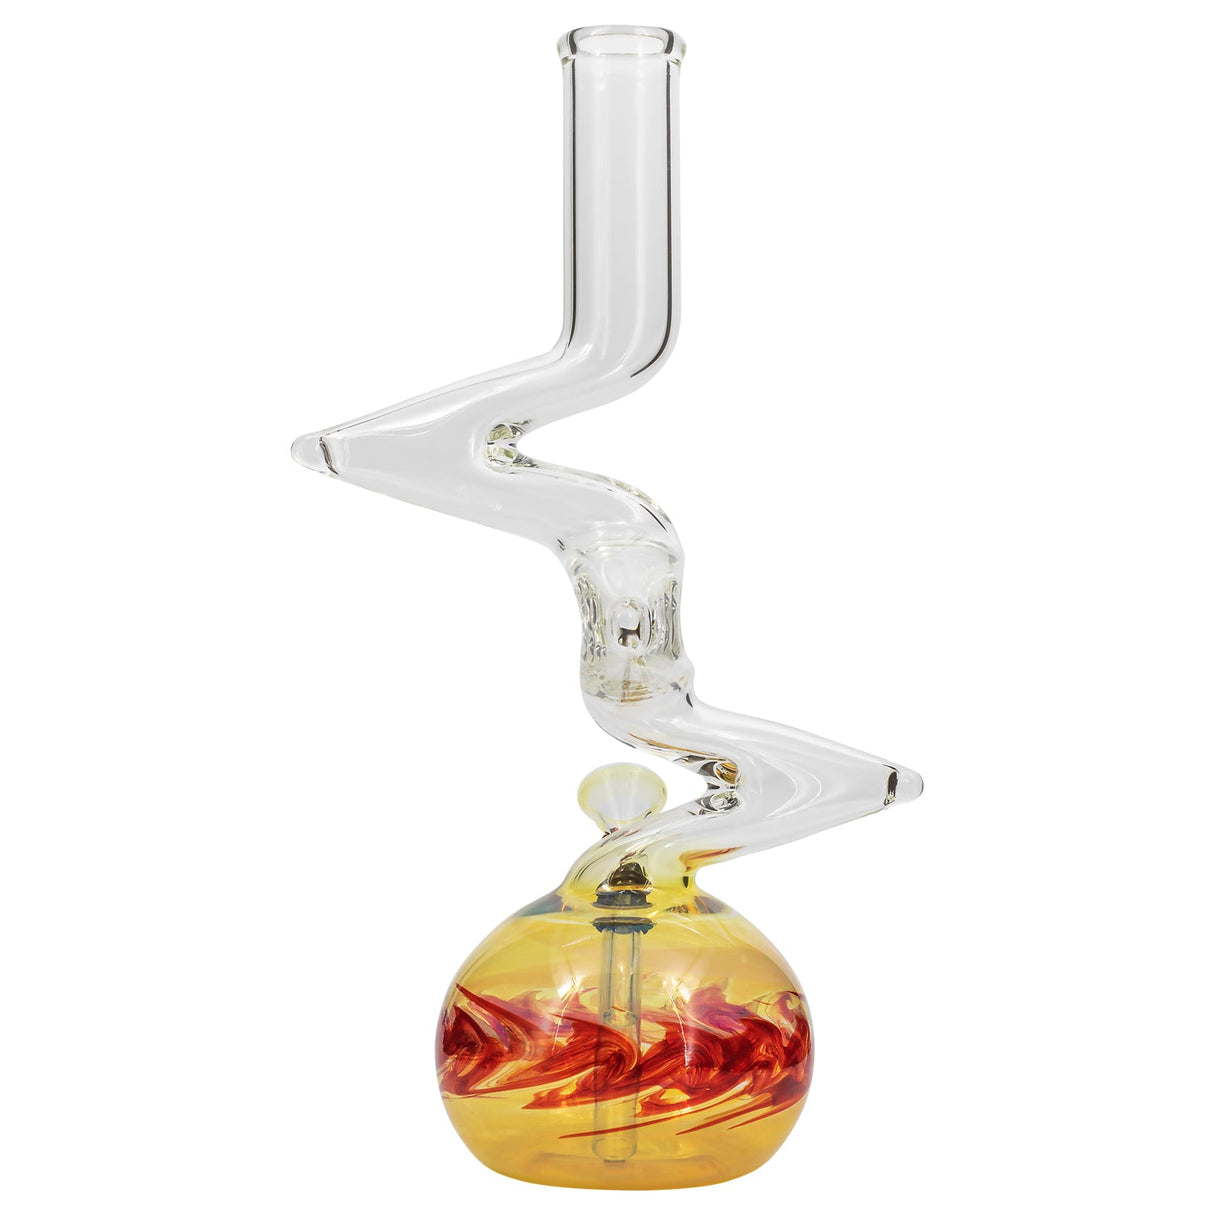 LA Pipes "Switchback" Bubble Base Bong with Zigzag Neck and Clear Glass